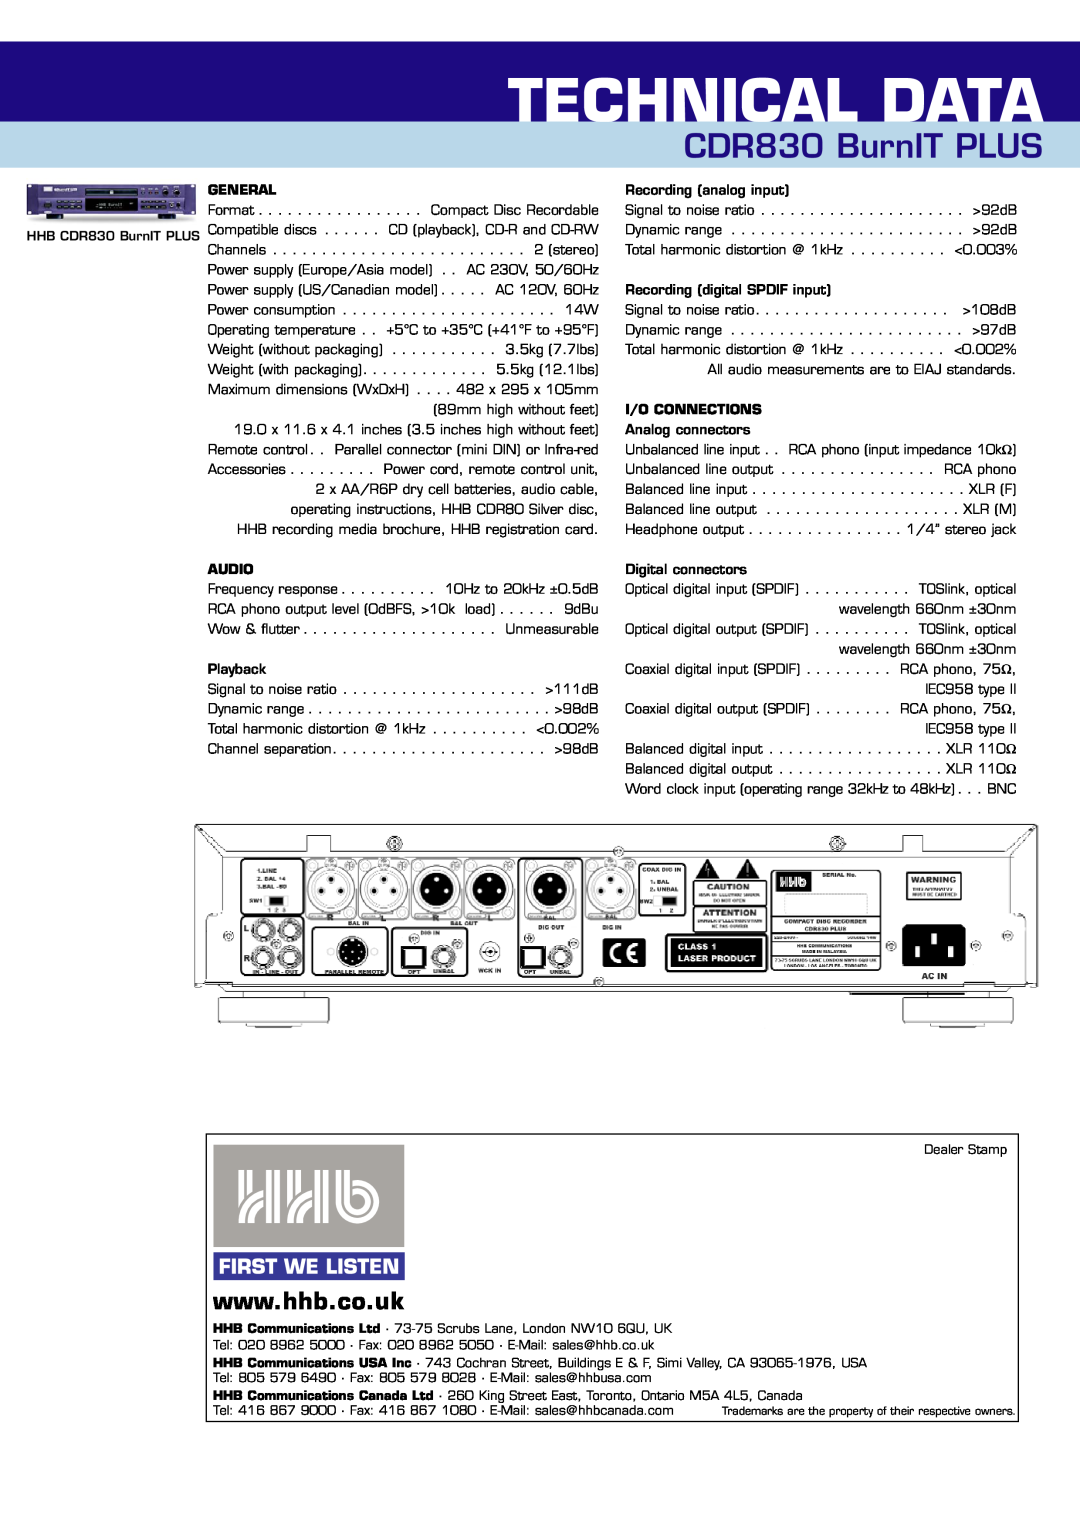 HHB comm CDR830PLUS brochure Technical Data, CDR830 BurnIT PLUS, General, I/O Connections, Audio 